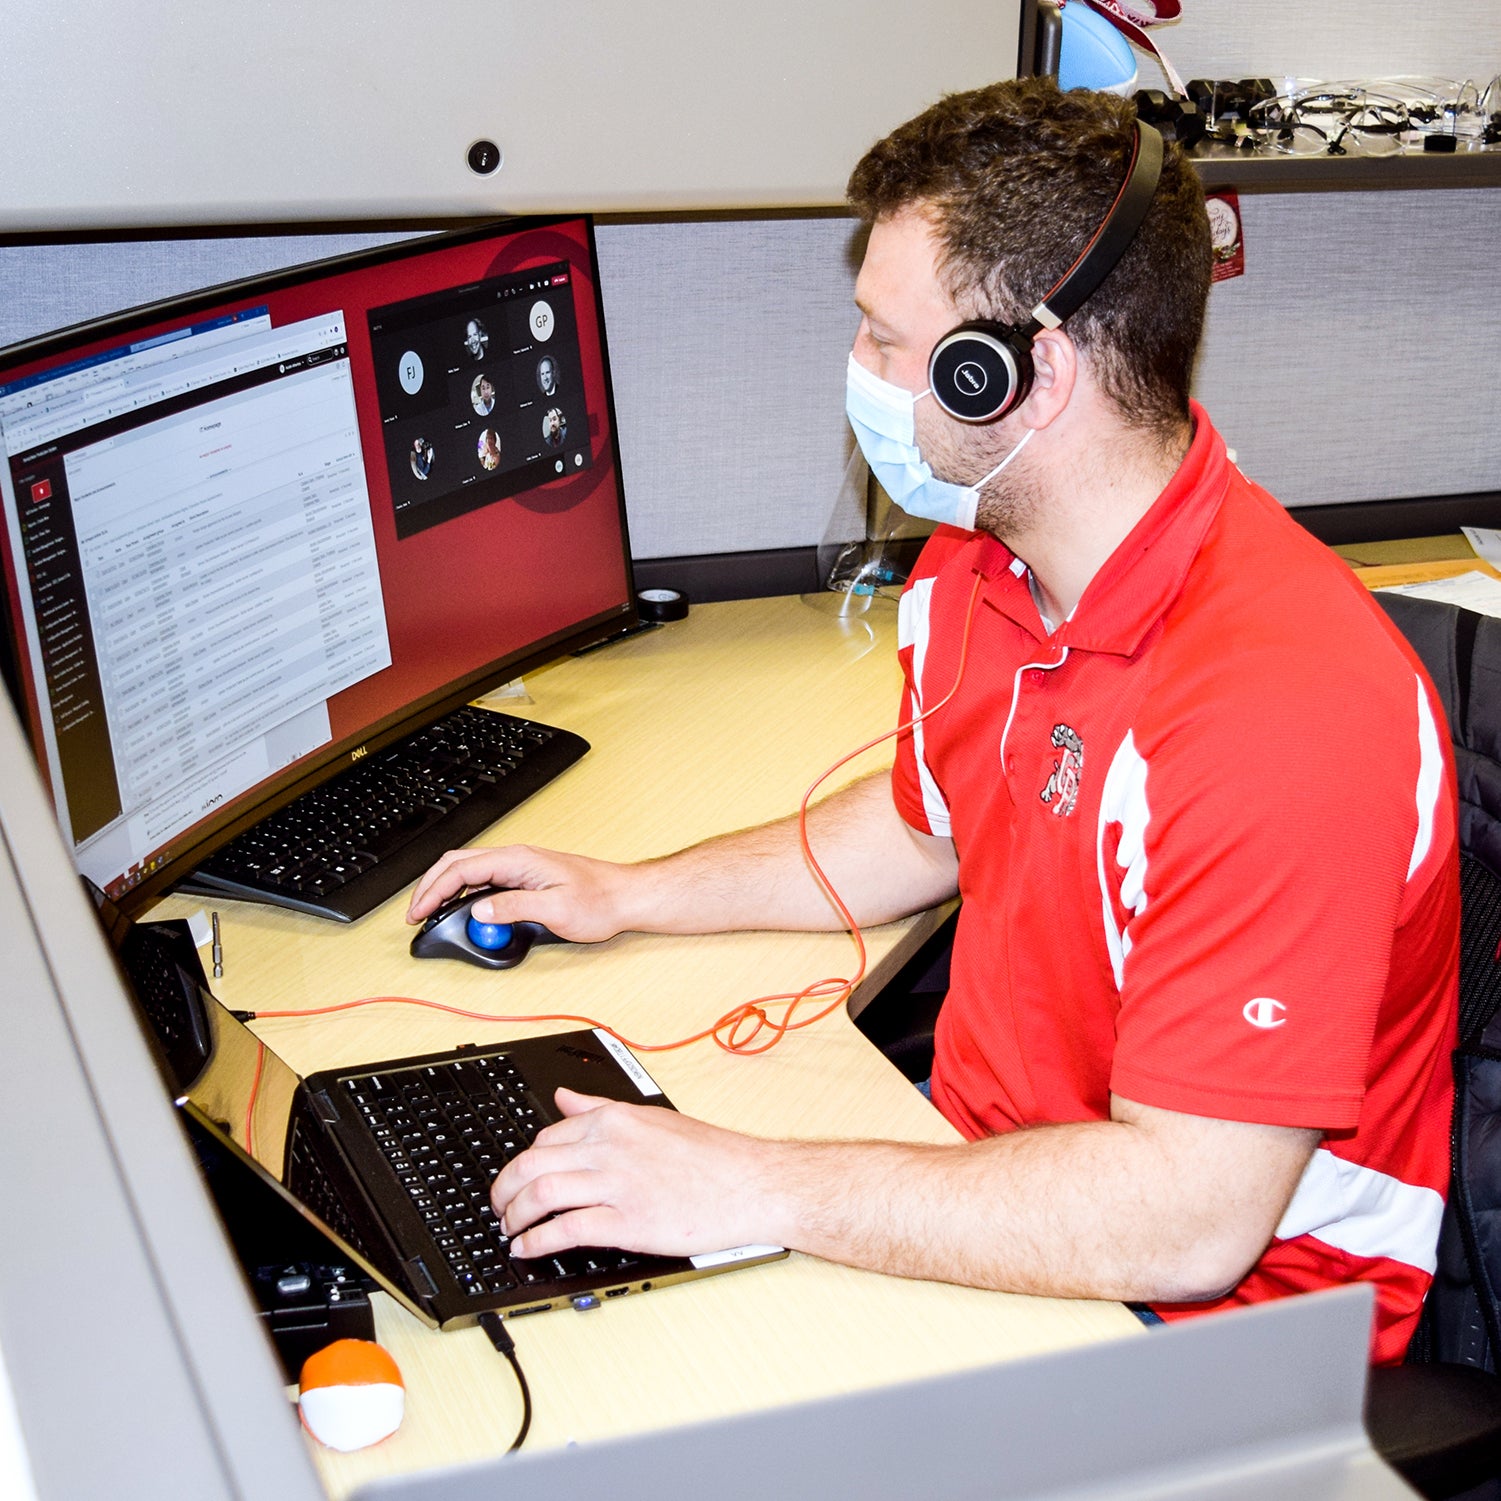 UL employee on a remote call while wearing a surgical mask